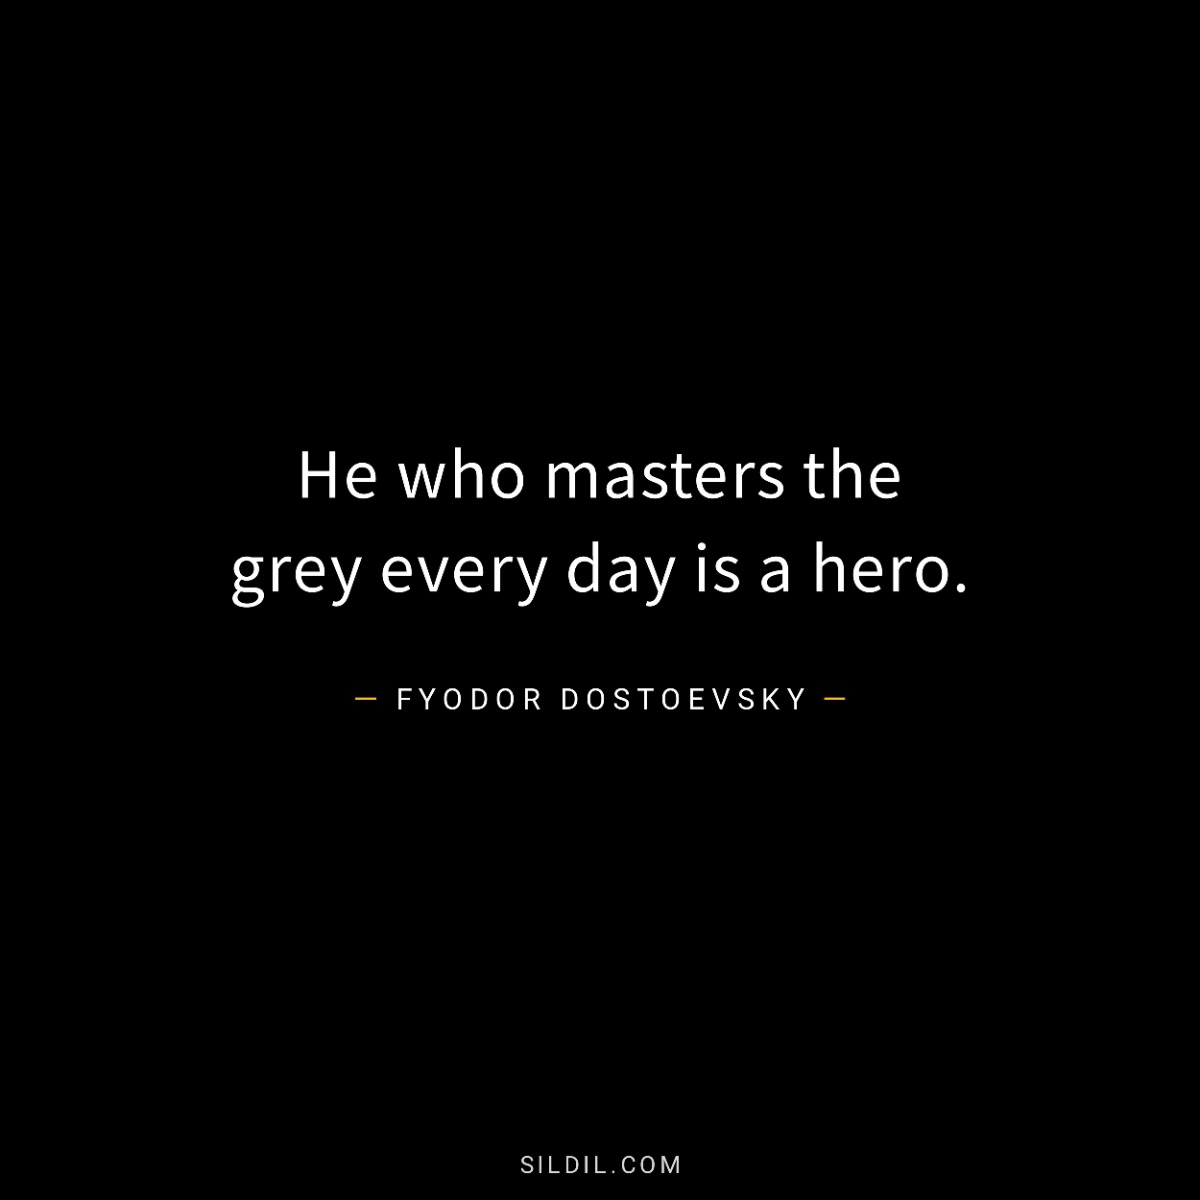 He who masters the grey every day is a hero.